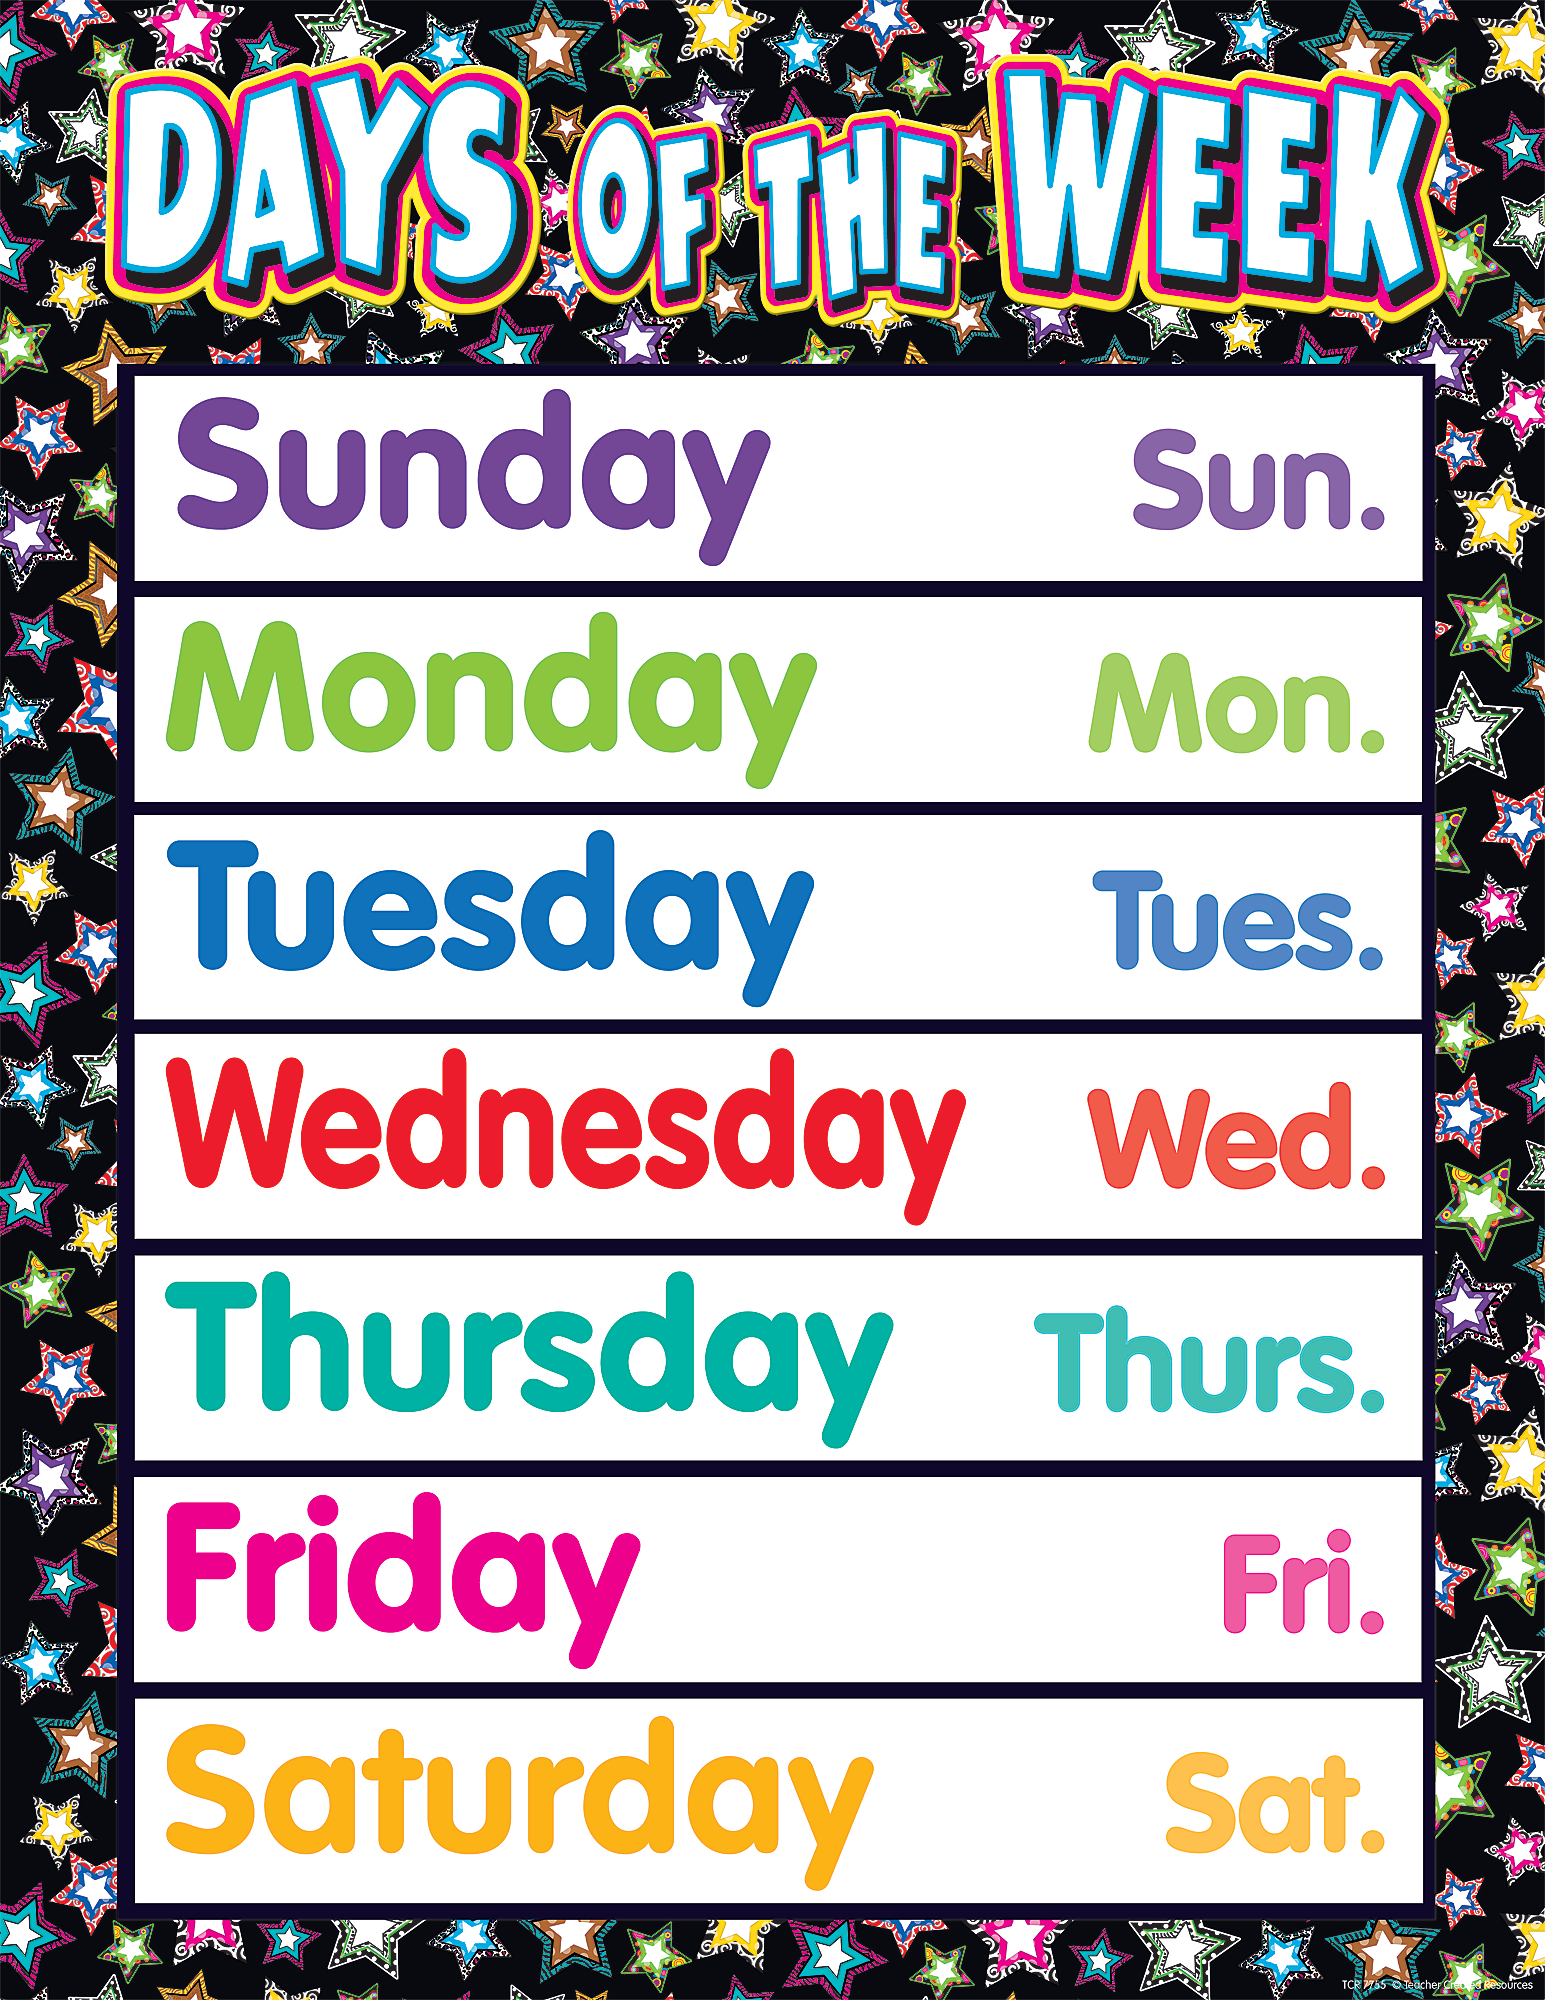 days-of-the-week-chart-for-preschoolers